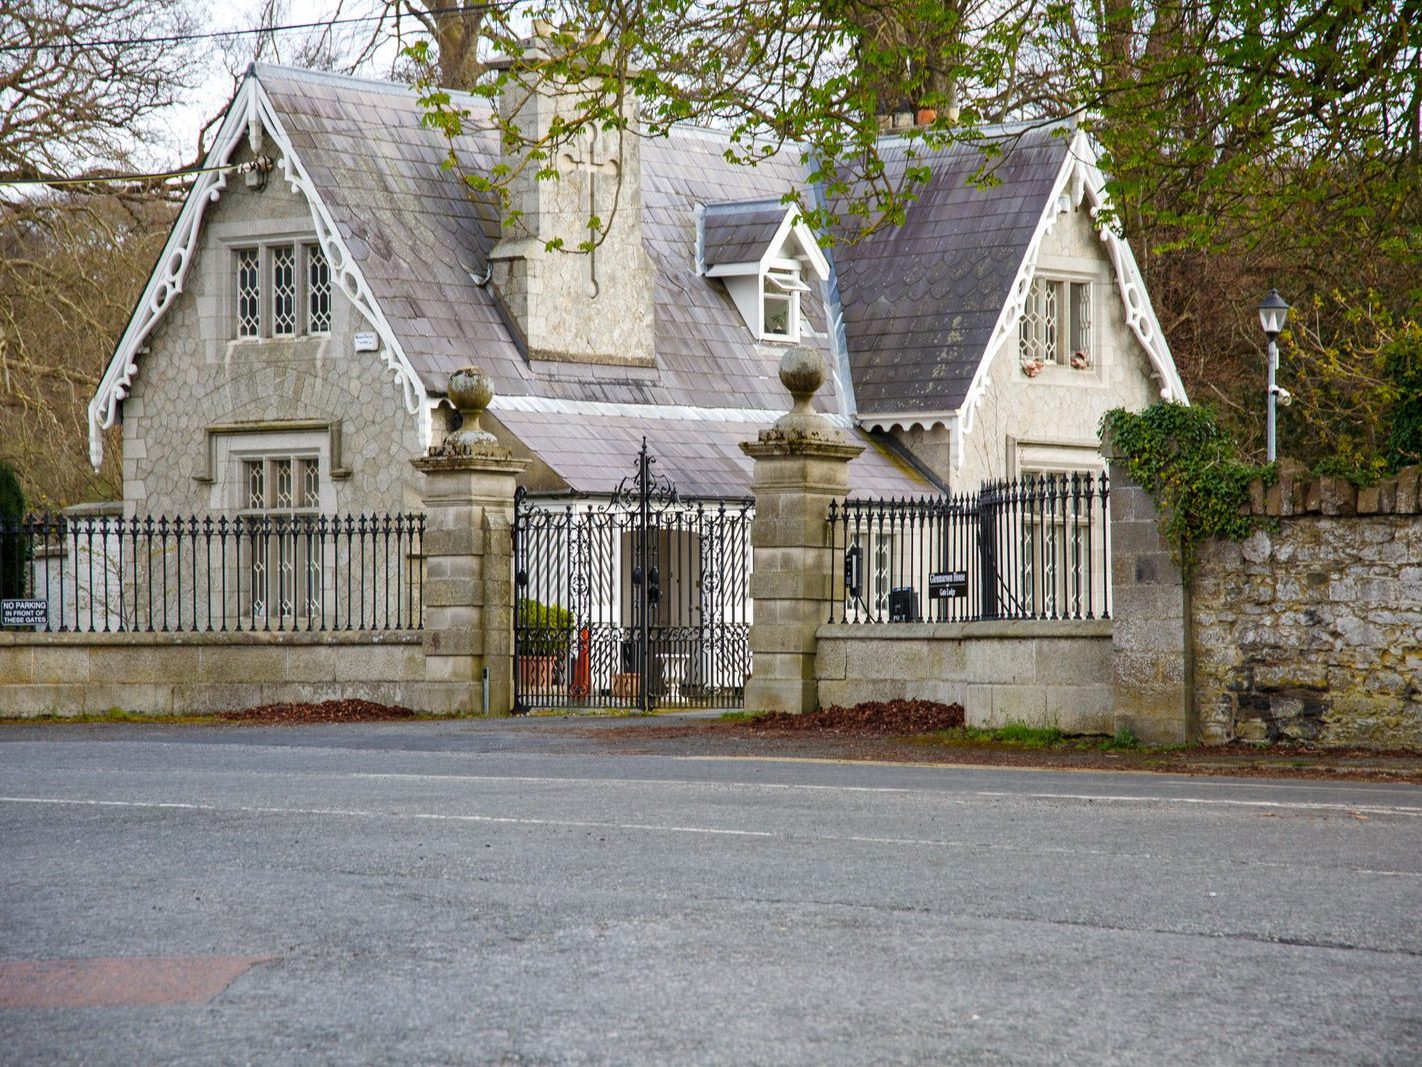 KNOCKMAROON GATE LODGE PHOENIX PARK [AND NEARBY]-223730-1